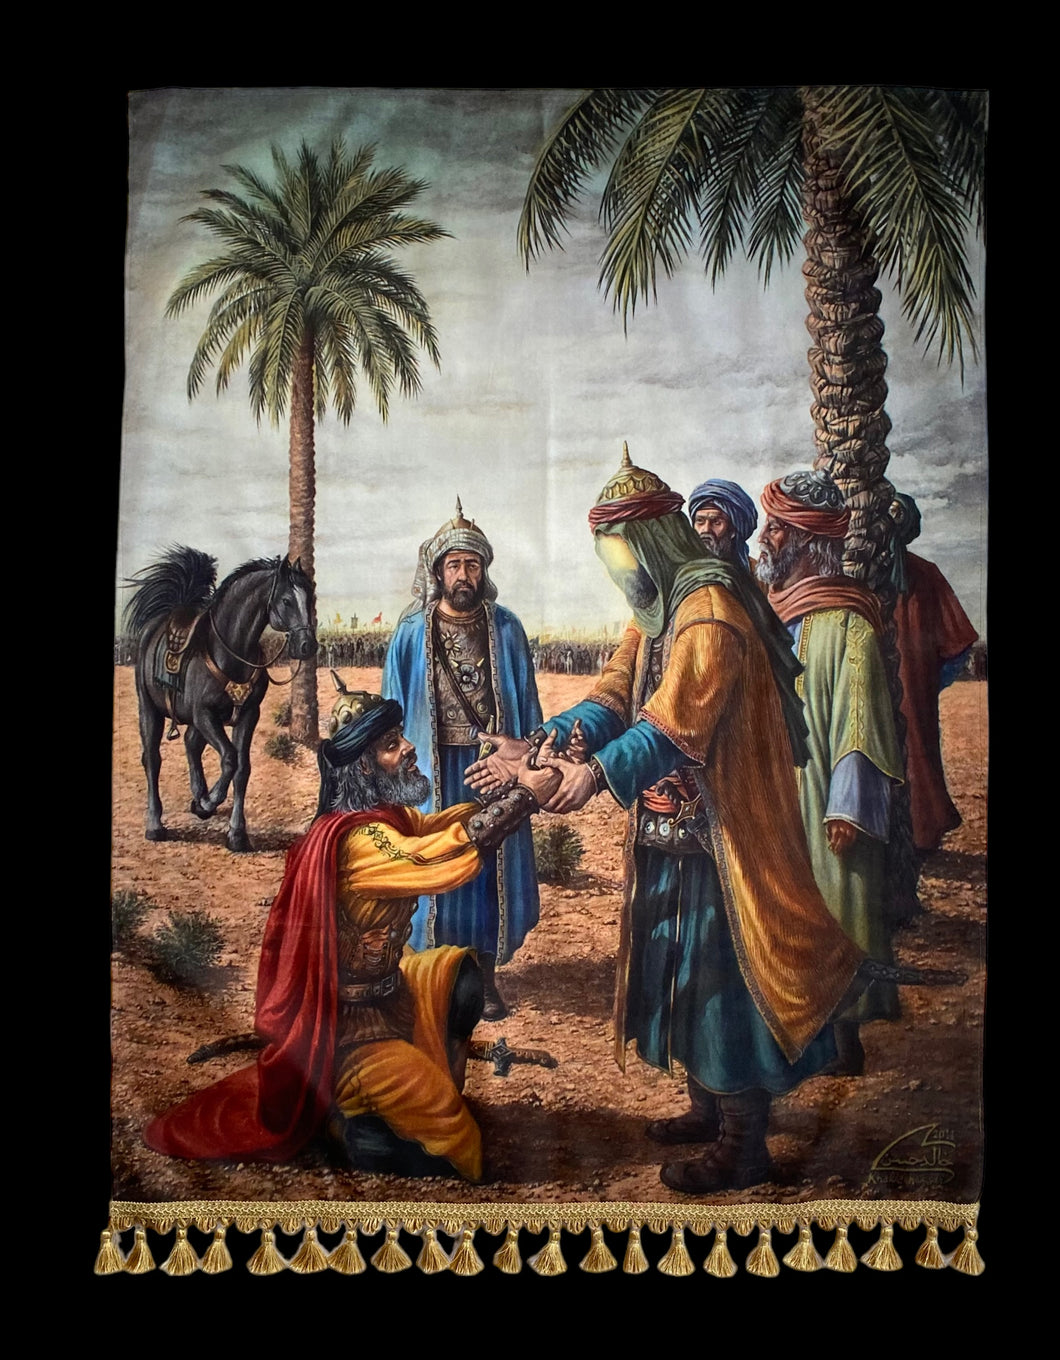 Al-Hurr solemnly pleaded to Hussain for forgiveness, banner, 42”X54”